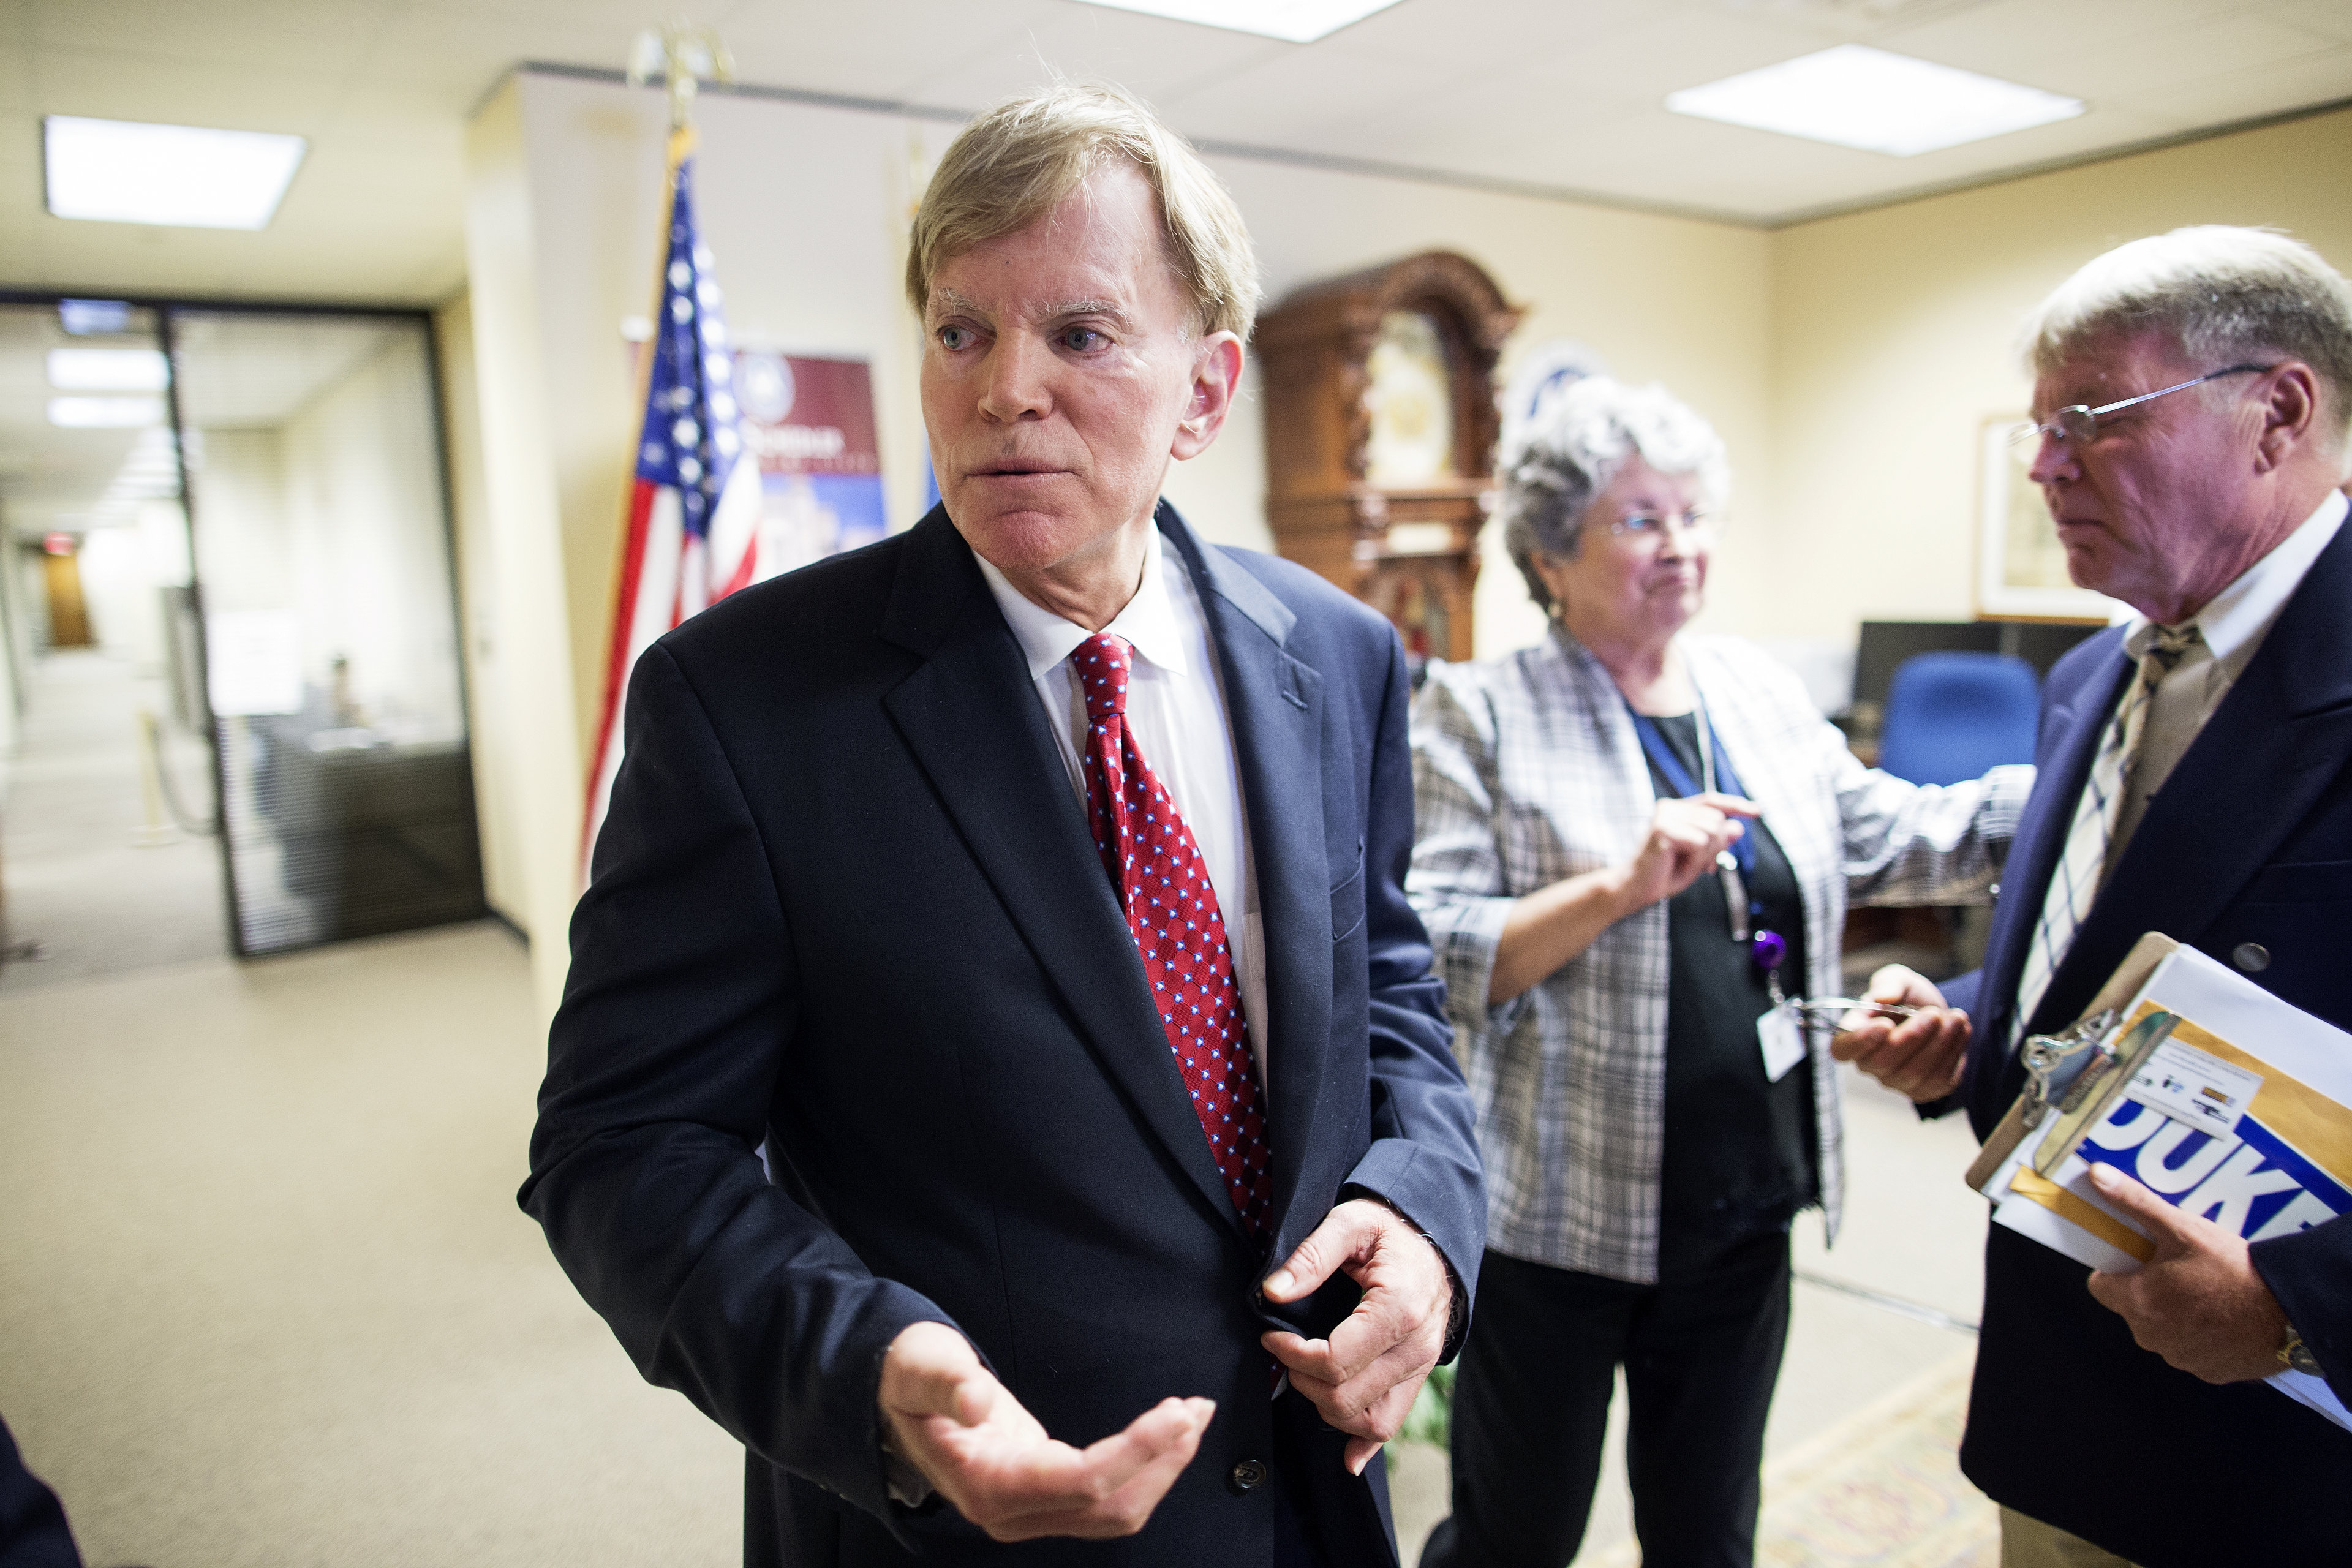 Former Ku Klux Klan leader David Duke talks to the media at the Louisiana Secretary of State's office after registering his candidacy for the November 8 ballot as a Republican in Baton Rouge, La. (AP Photo/Max Becherer)